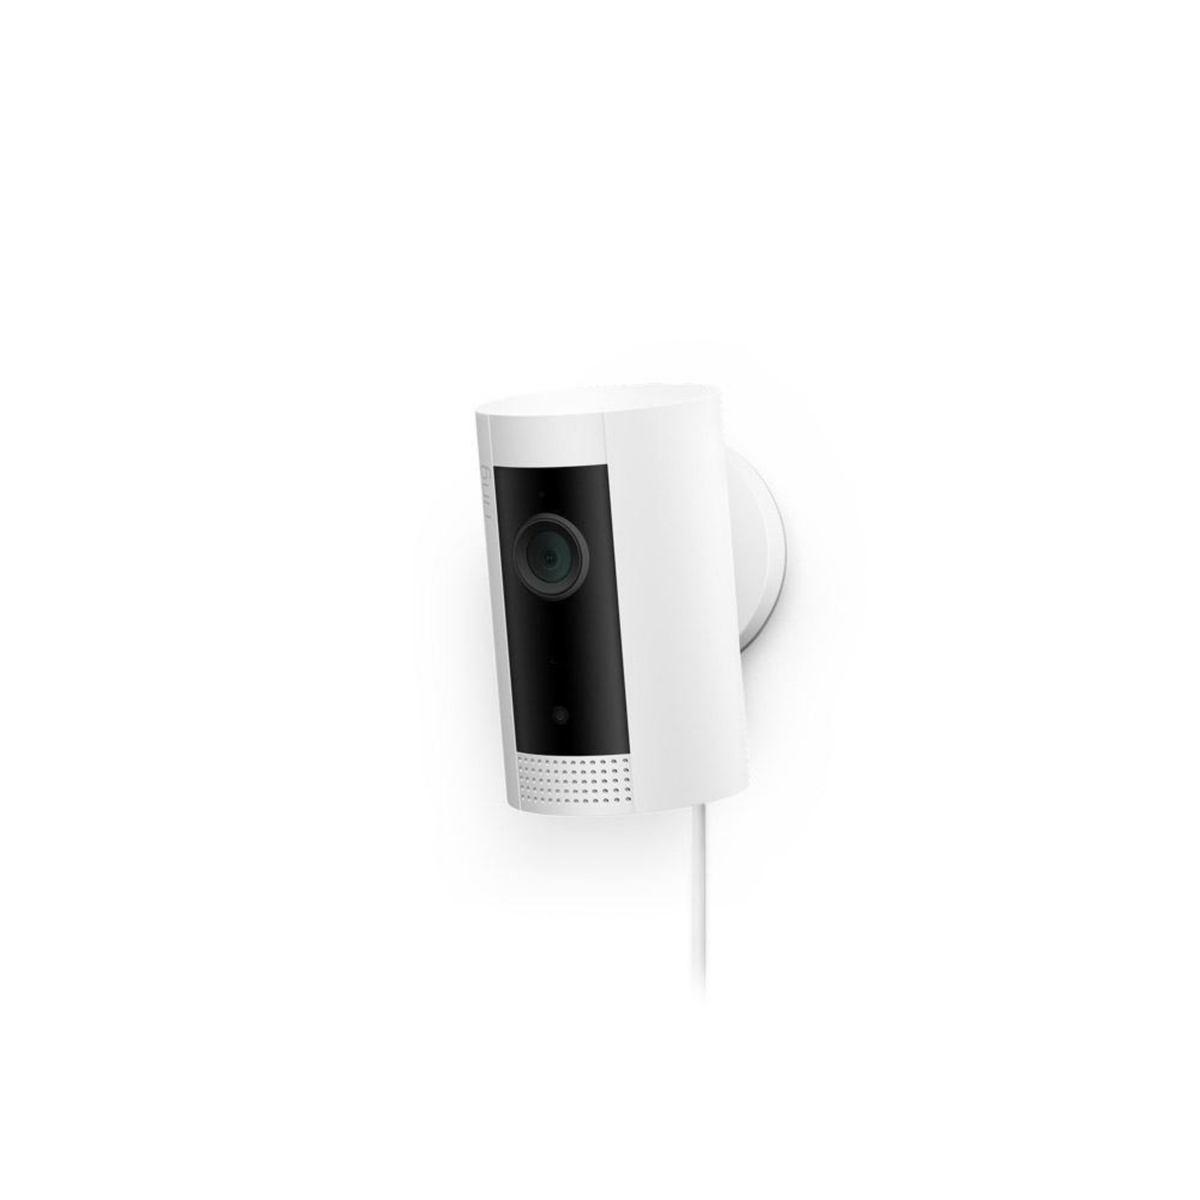 Ring Home Security Indoor Camera, 1080p HD, White, 8SN1S9-WME1